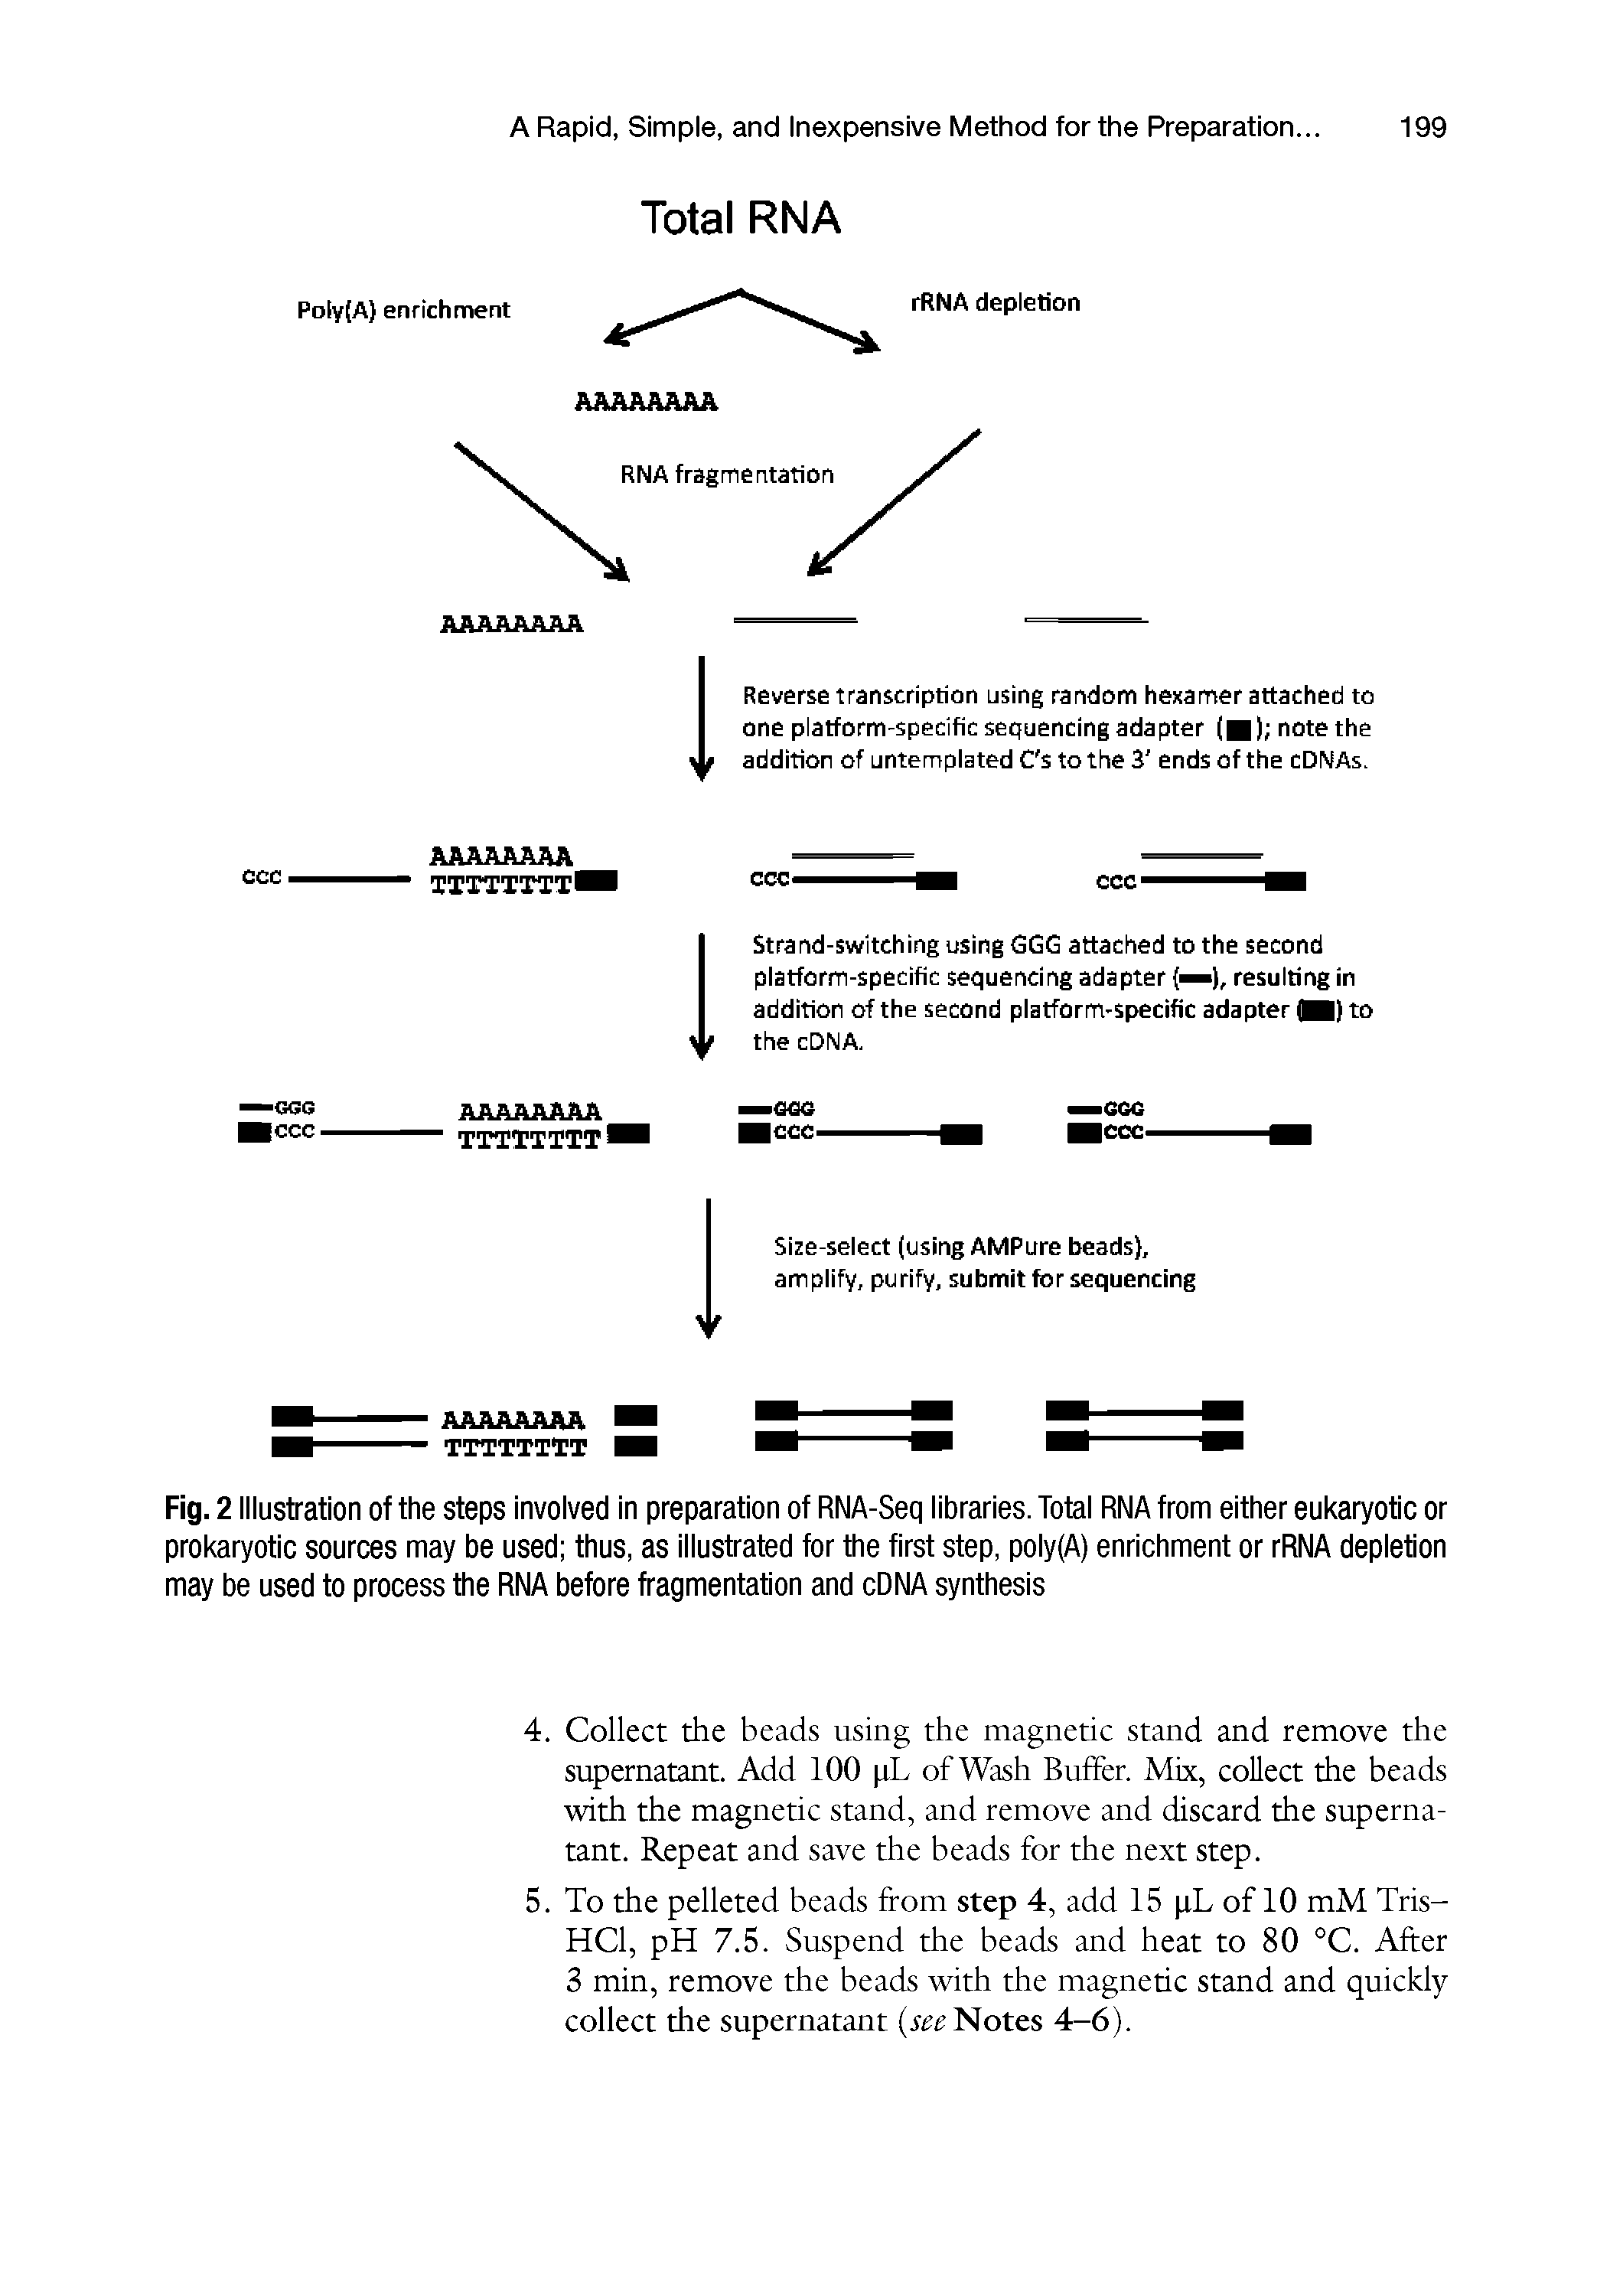 Fig. 2 Illustration of the steps involved in preparation of RNA-Seq libraries. Total RNA from either eukaryotic or prokaryotic sources may be used thus, as illustrated for the first step, poly(A) enrichment or rRNA depletion may be used to process the RNA before fragmentation and cDNA synthesis...